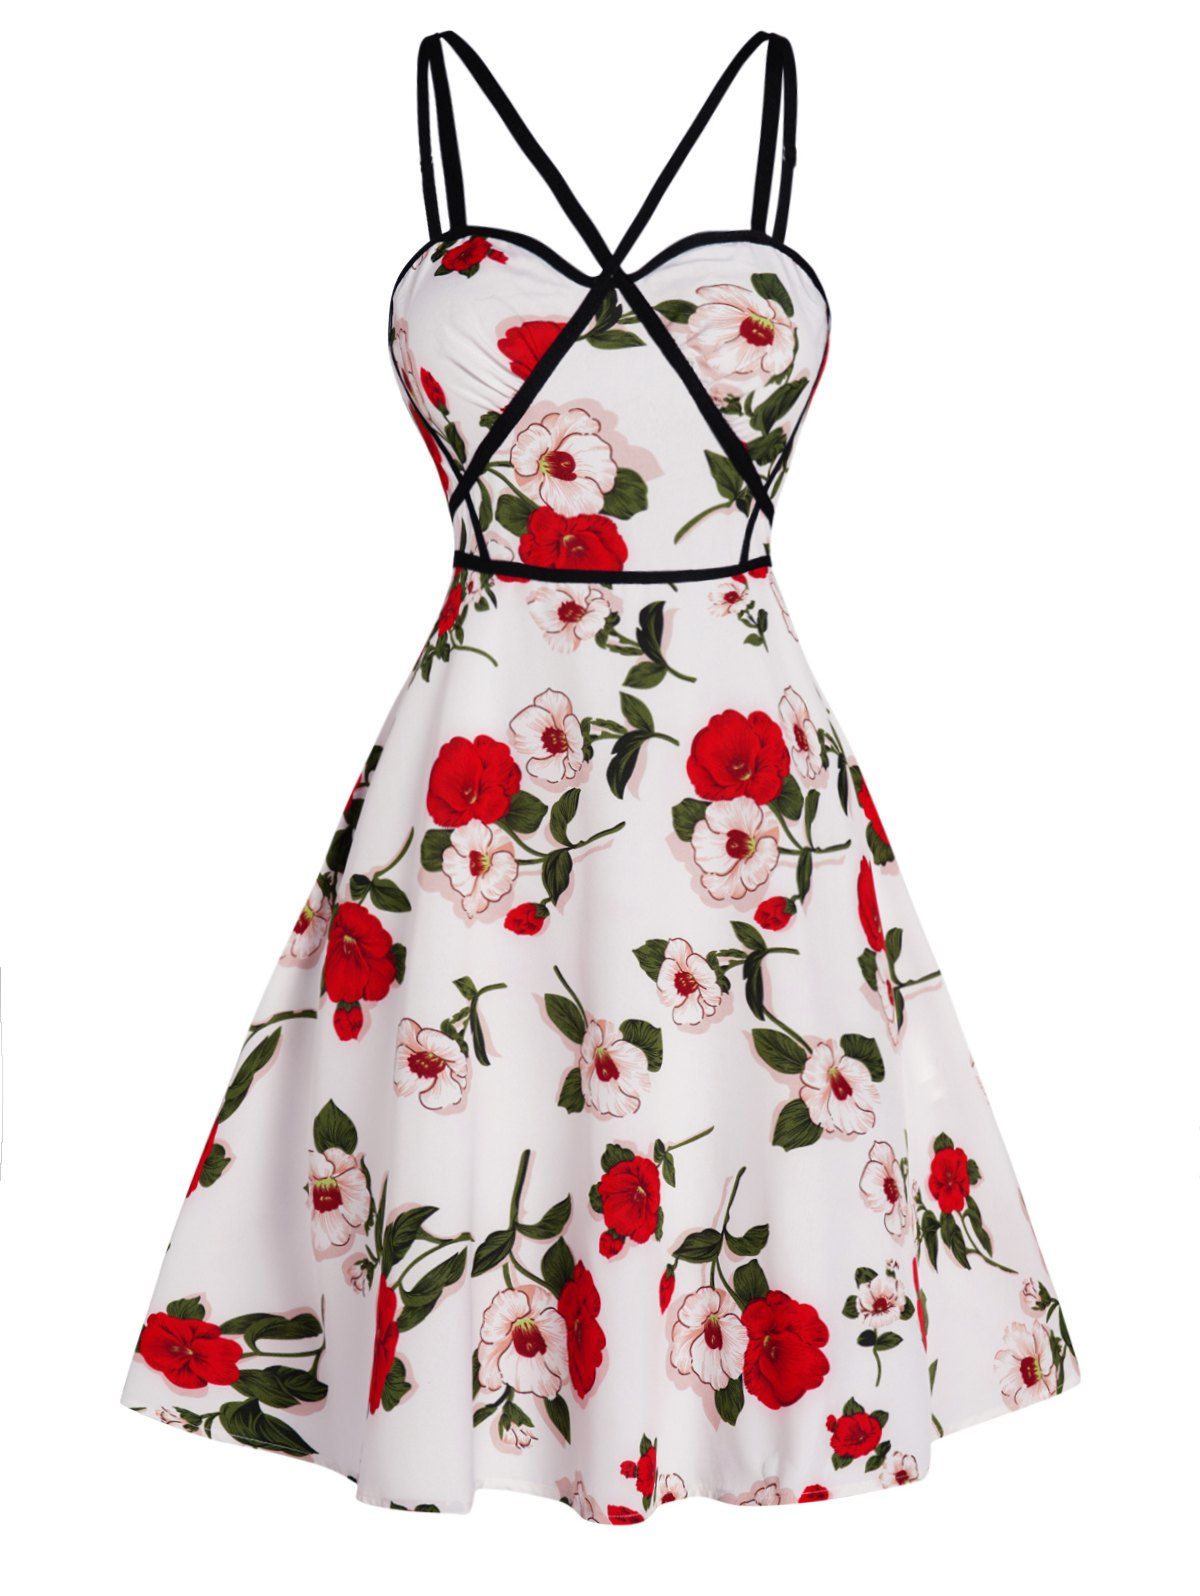 Flower Print Mini Sundress Contrast Piping Crossover Adjustable Strap A Line Dress - WHITE L